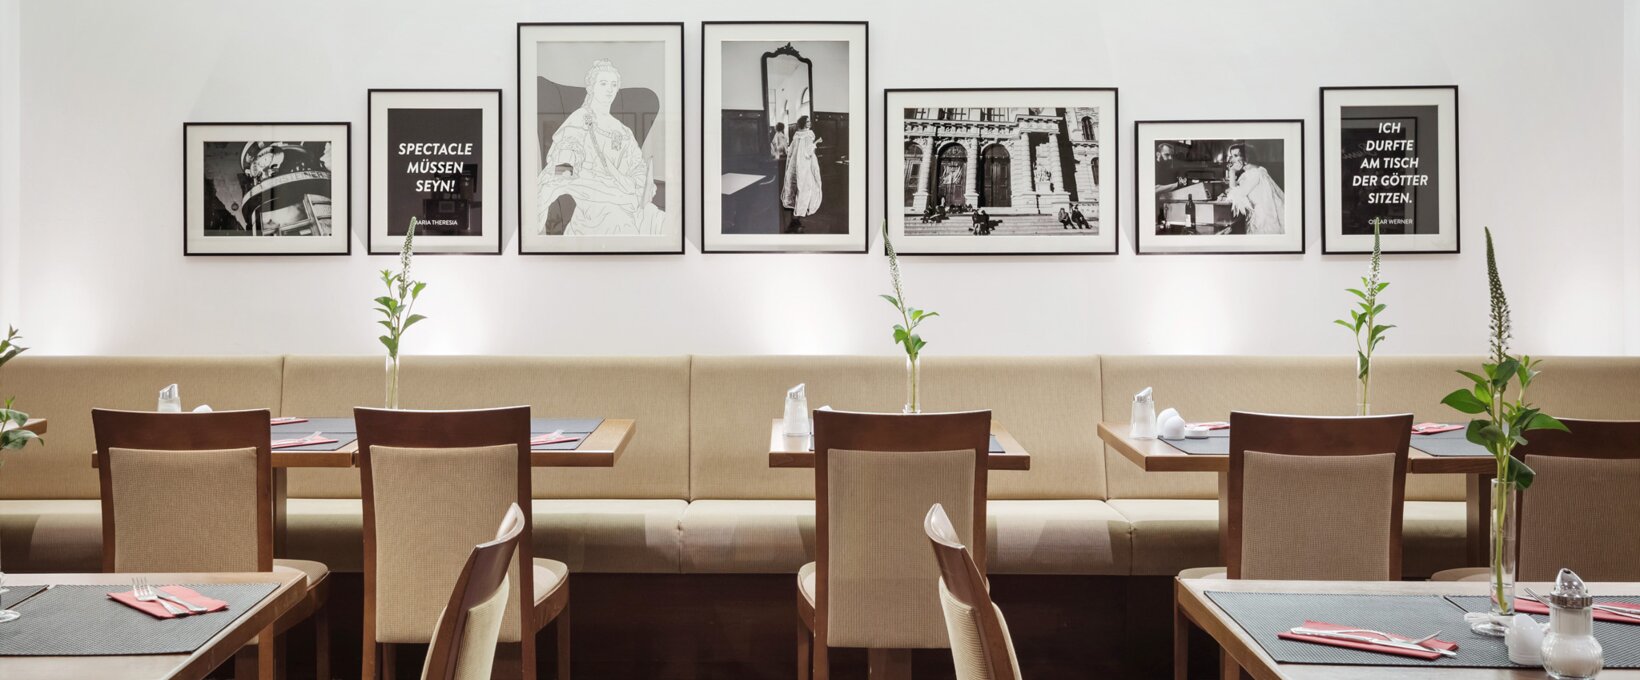 Restaurant with laid table and paintings | Hotel Rathauspark in Vienna